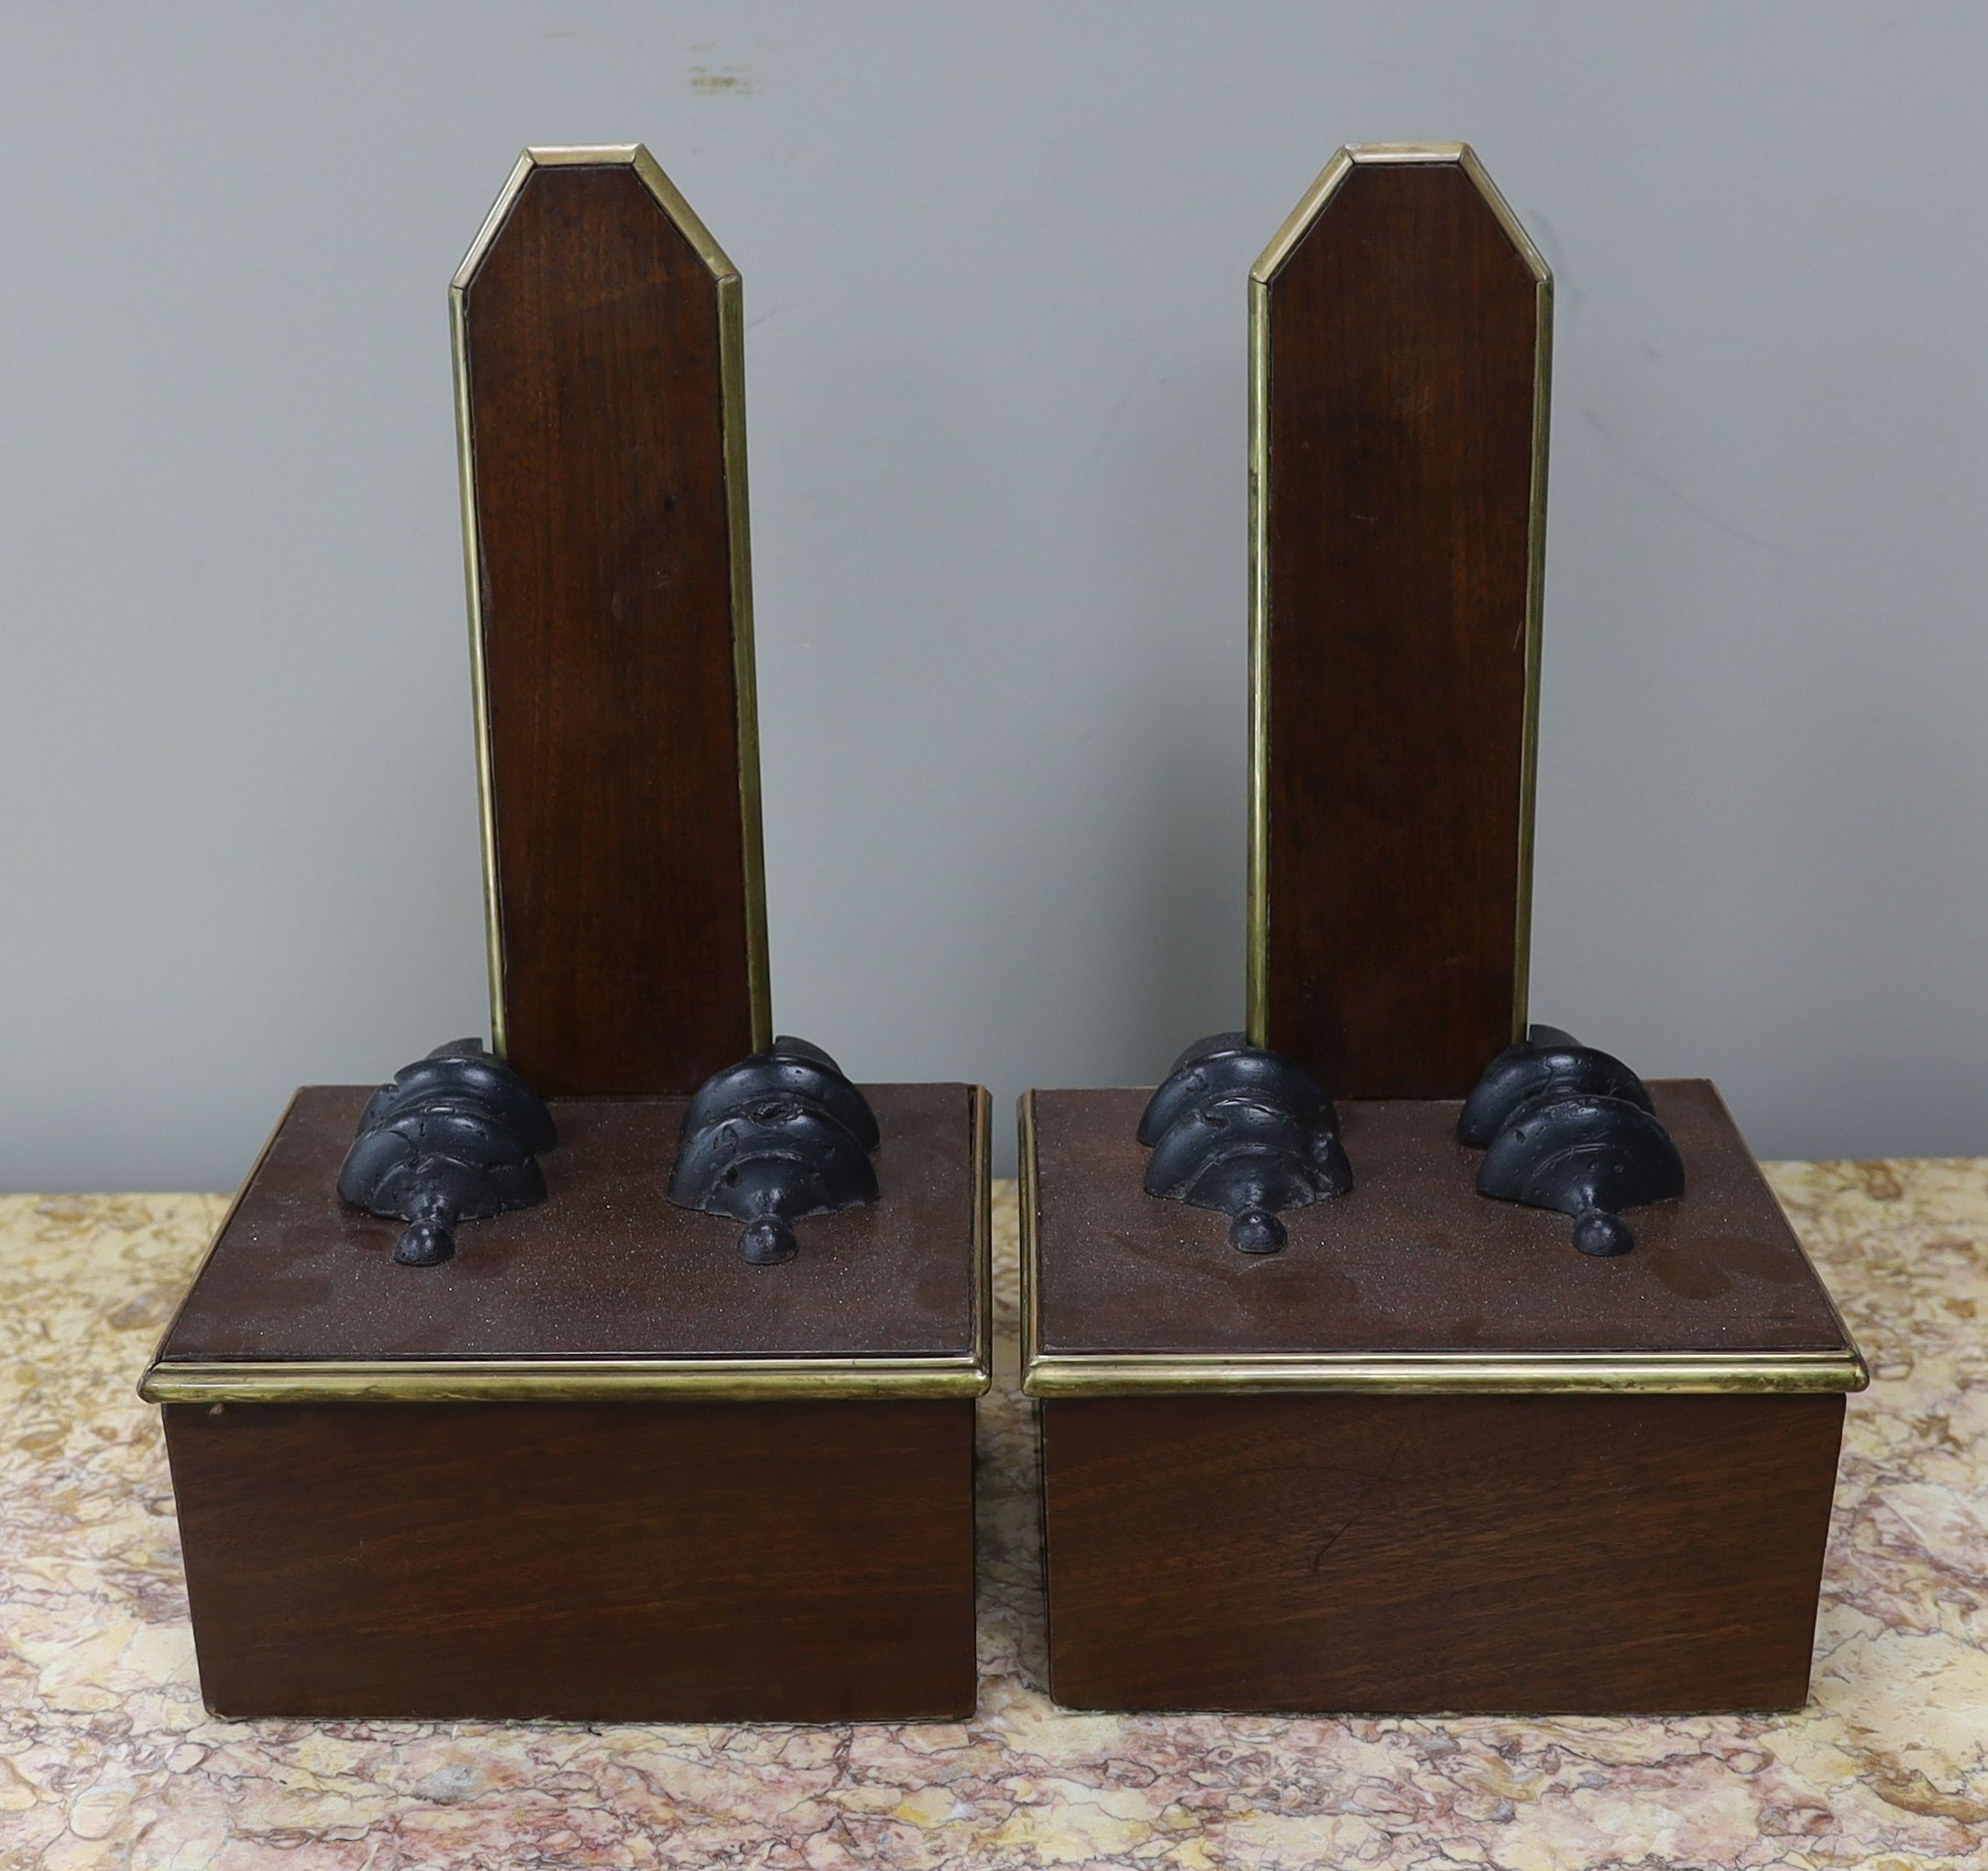 Pair of Gillows style parcel gilt mahogany plate stands, H 39 cms.